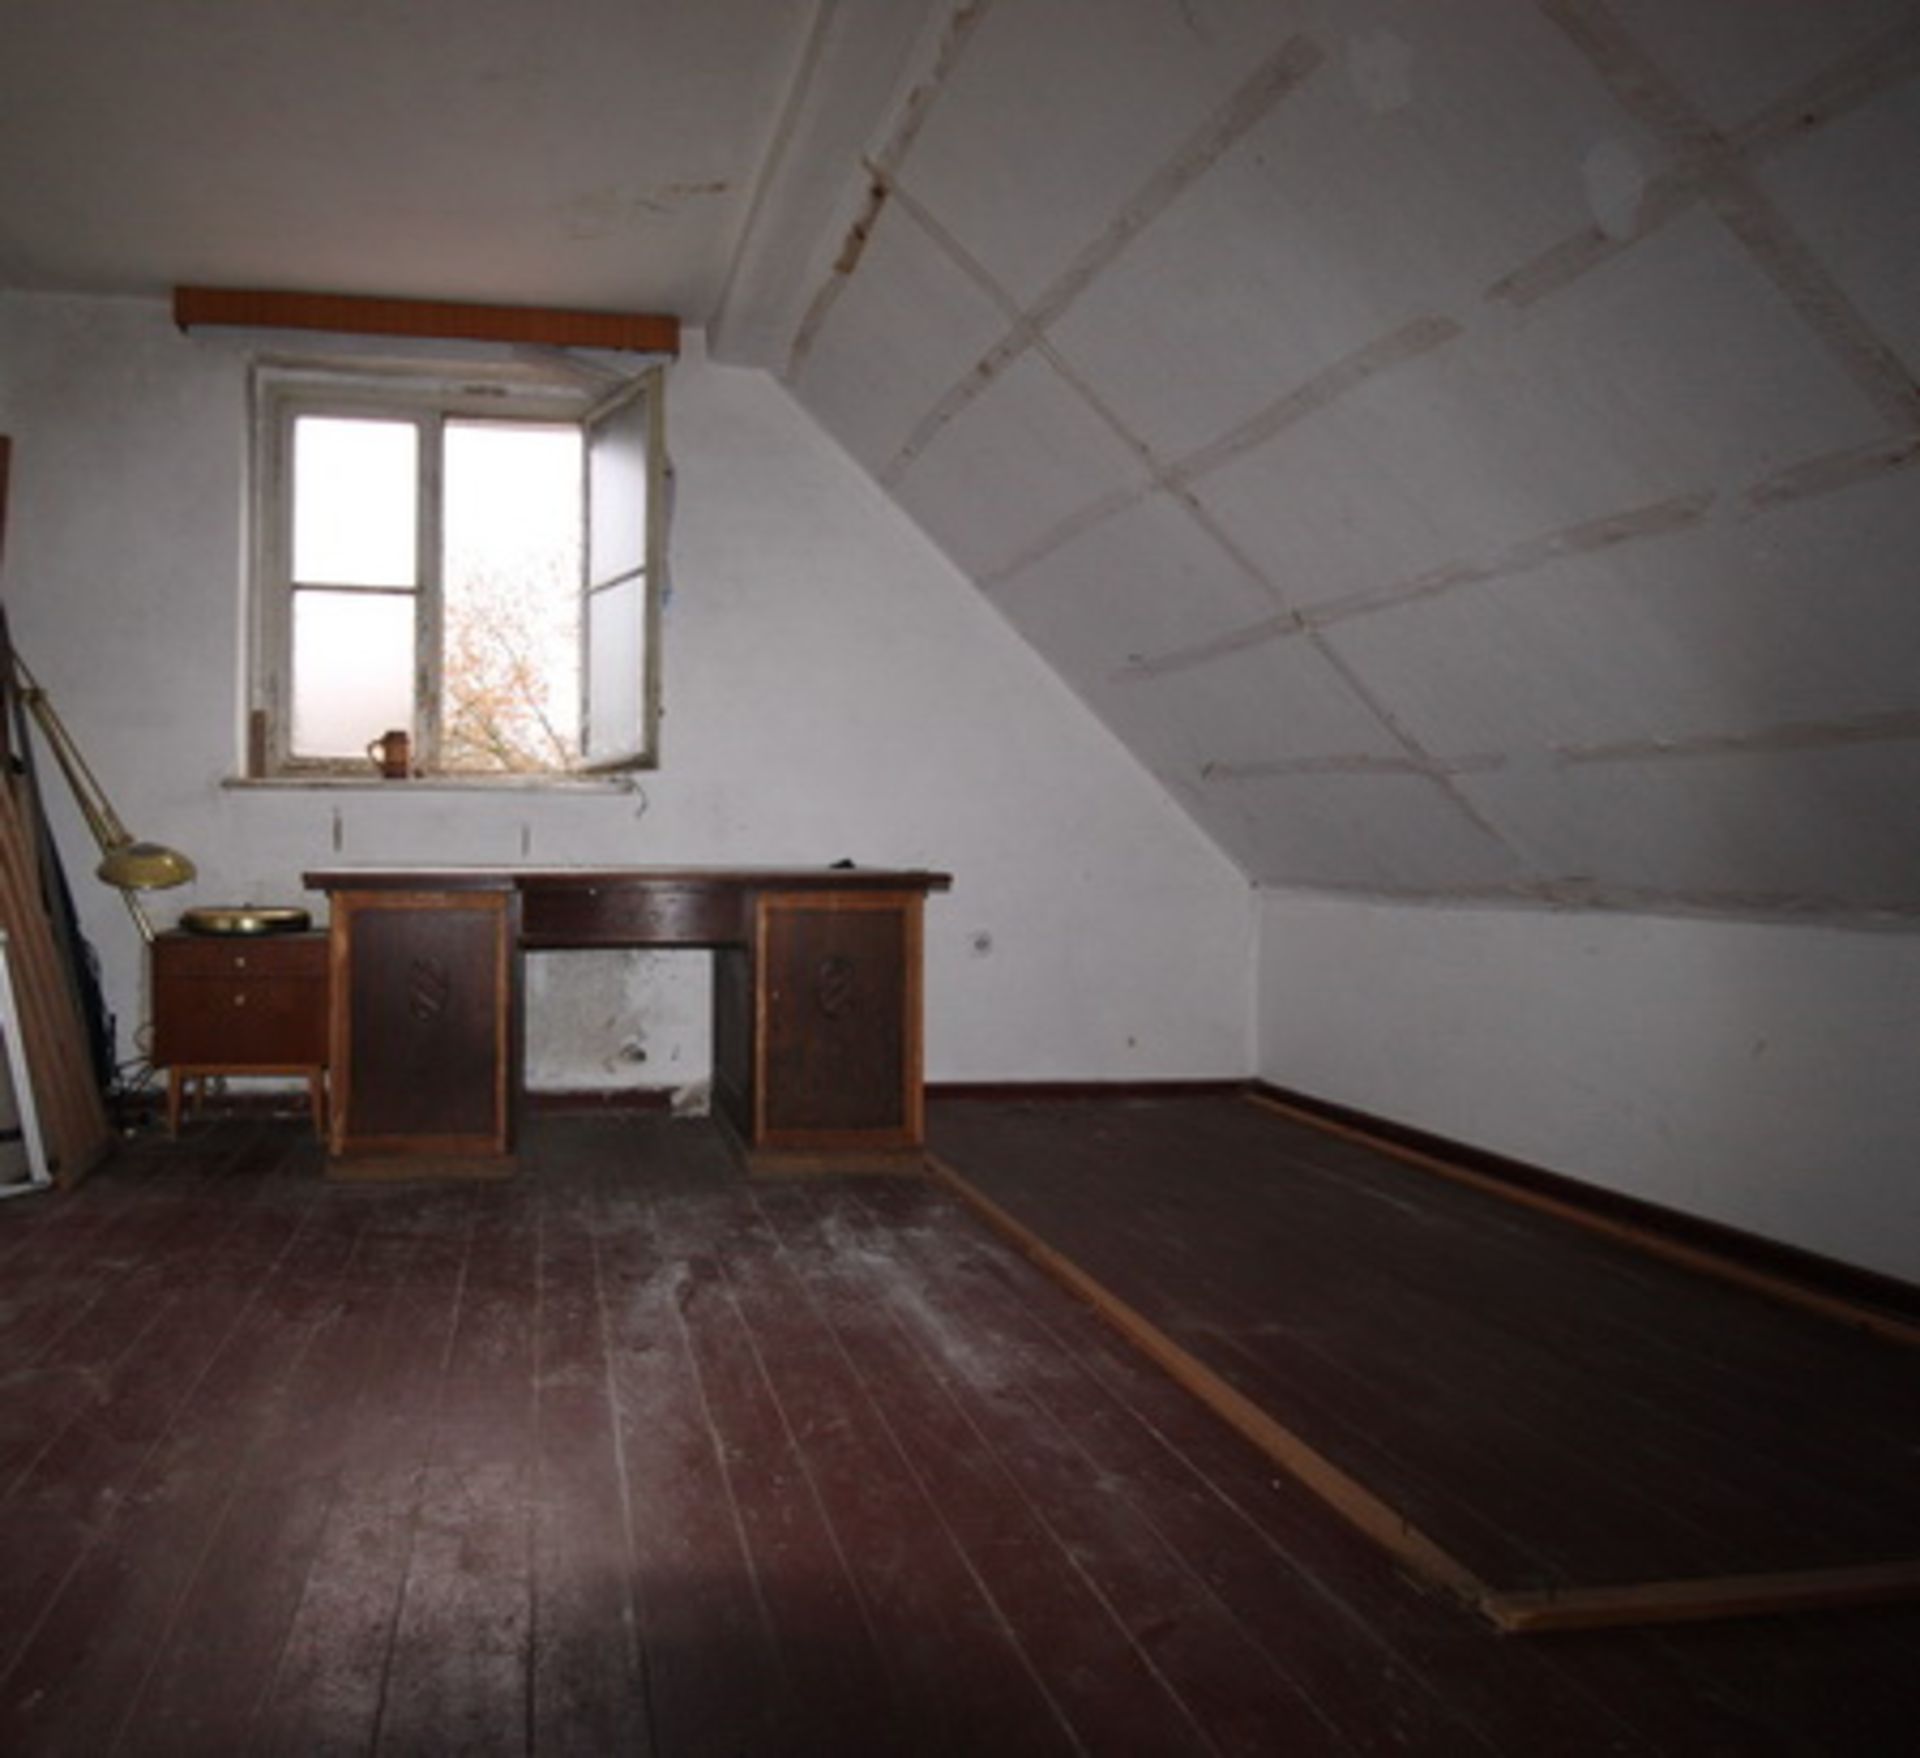 NO RESERVE 3,681 sqm - Massive Farm: Cow Shed, Dairy & Two Storey House - Germany - Image 12 of 54